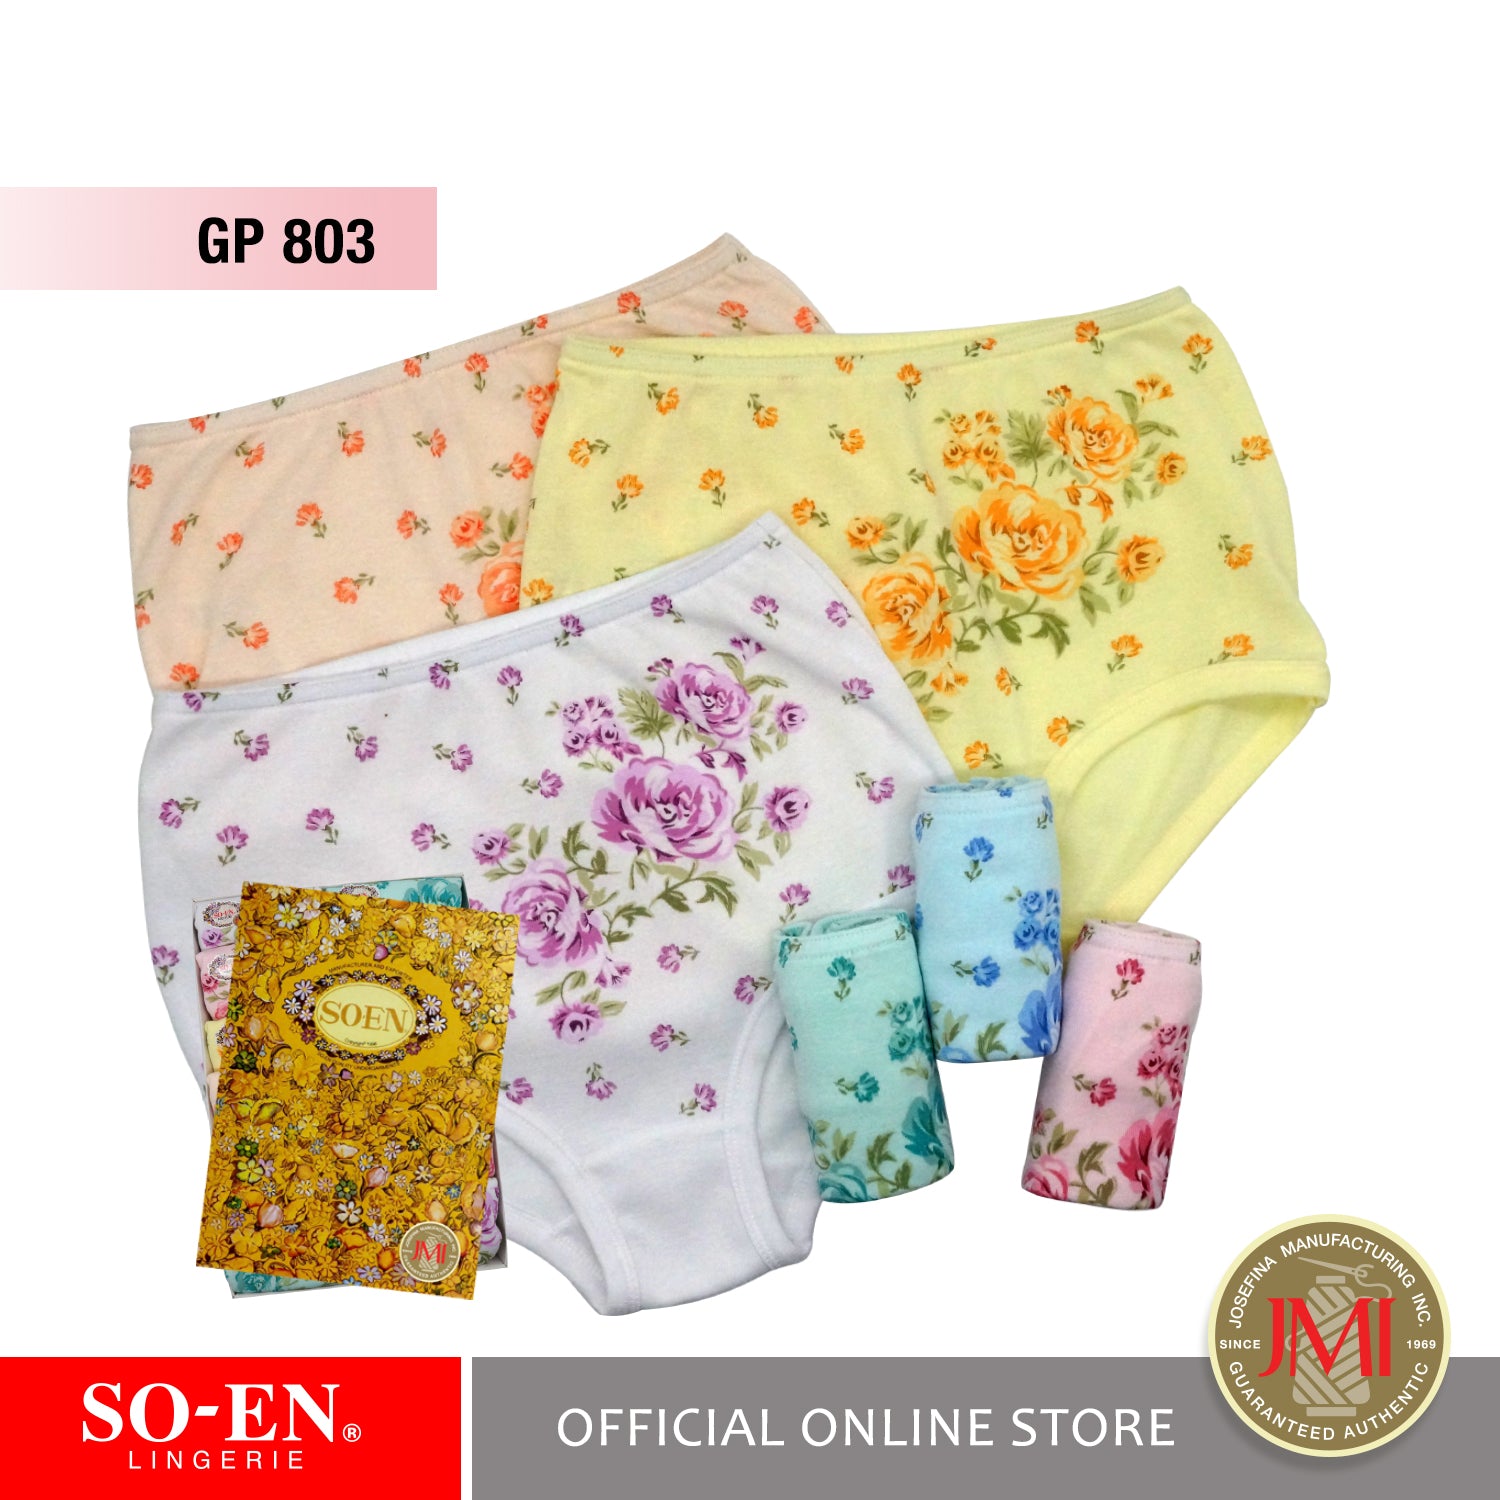 SOEN Lingerie on X: Compliment your natural curves comfortably with a panty  style you love to wear! Which style is your personal favorite and why?   / X